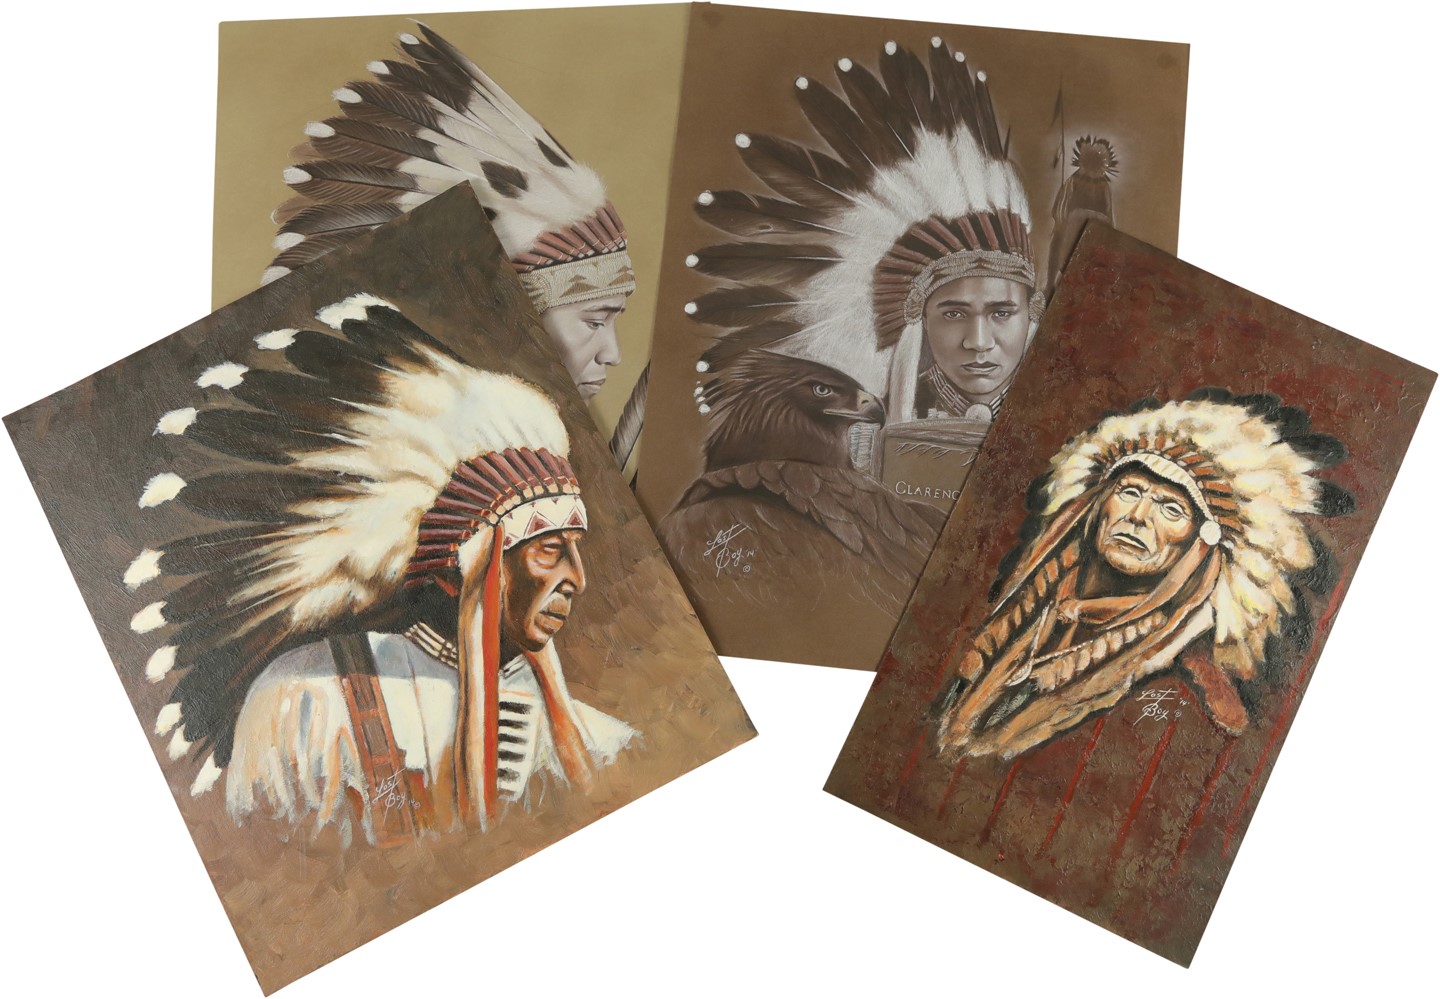 Chip And Whitey Collection - Original Native American Artwork Depicted in the Last Known Photographs of Whitey Bulger with Direct Provenance from Bulger (PSA)